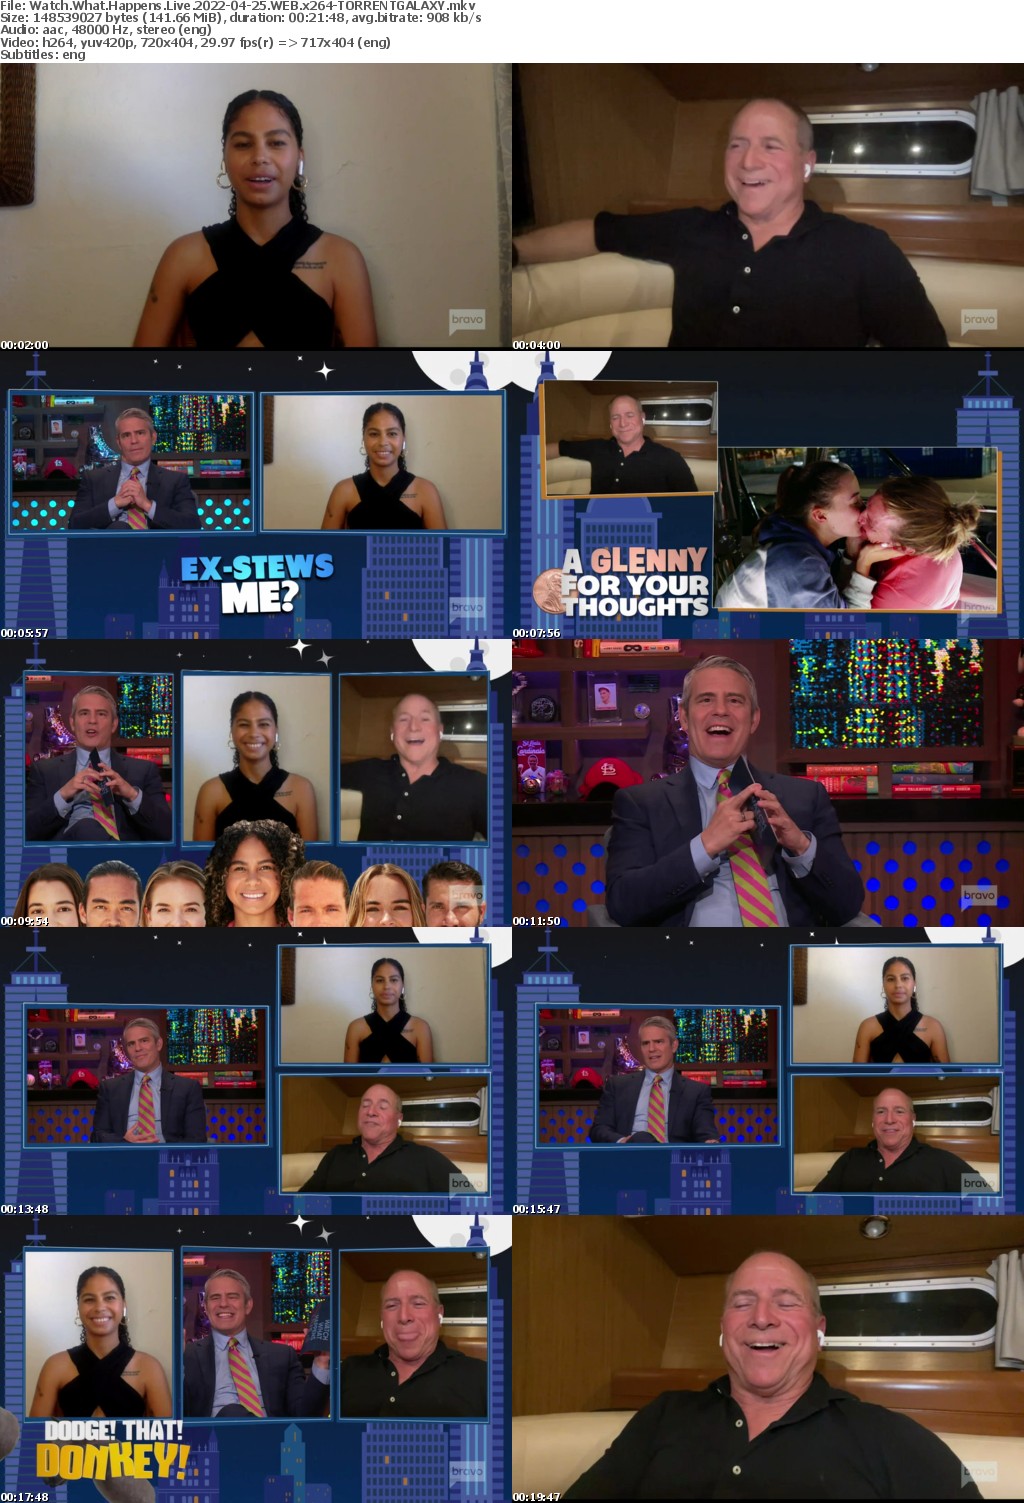 Watch What Happens Live 2022-04-25 WEB x264-GALAXY